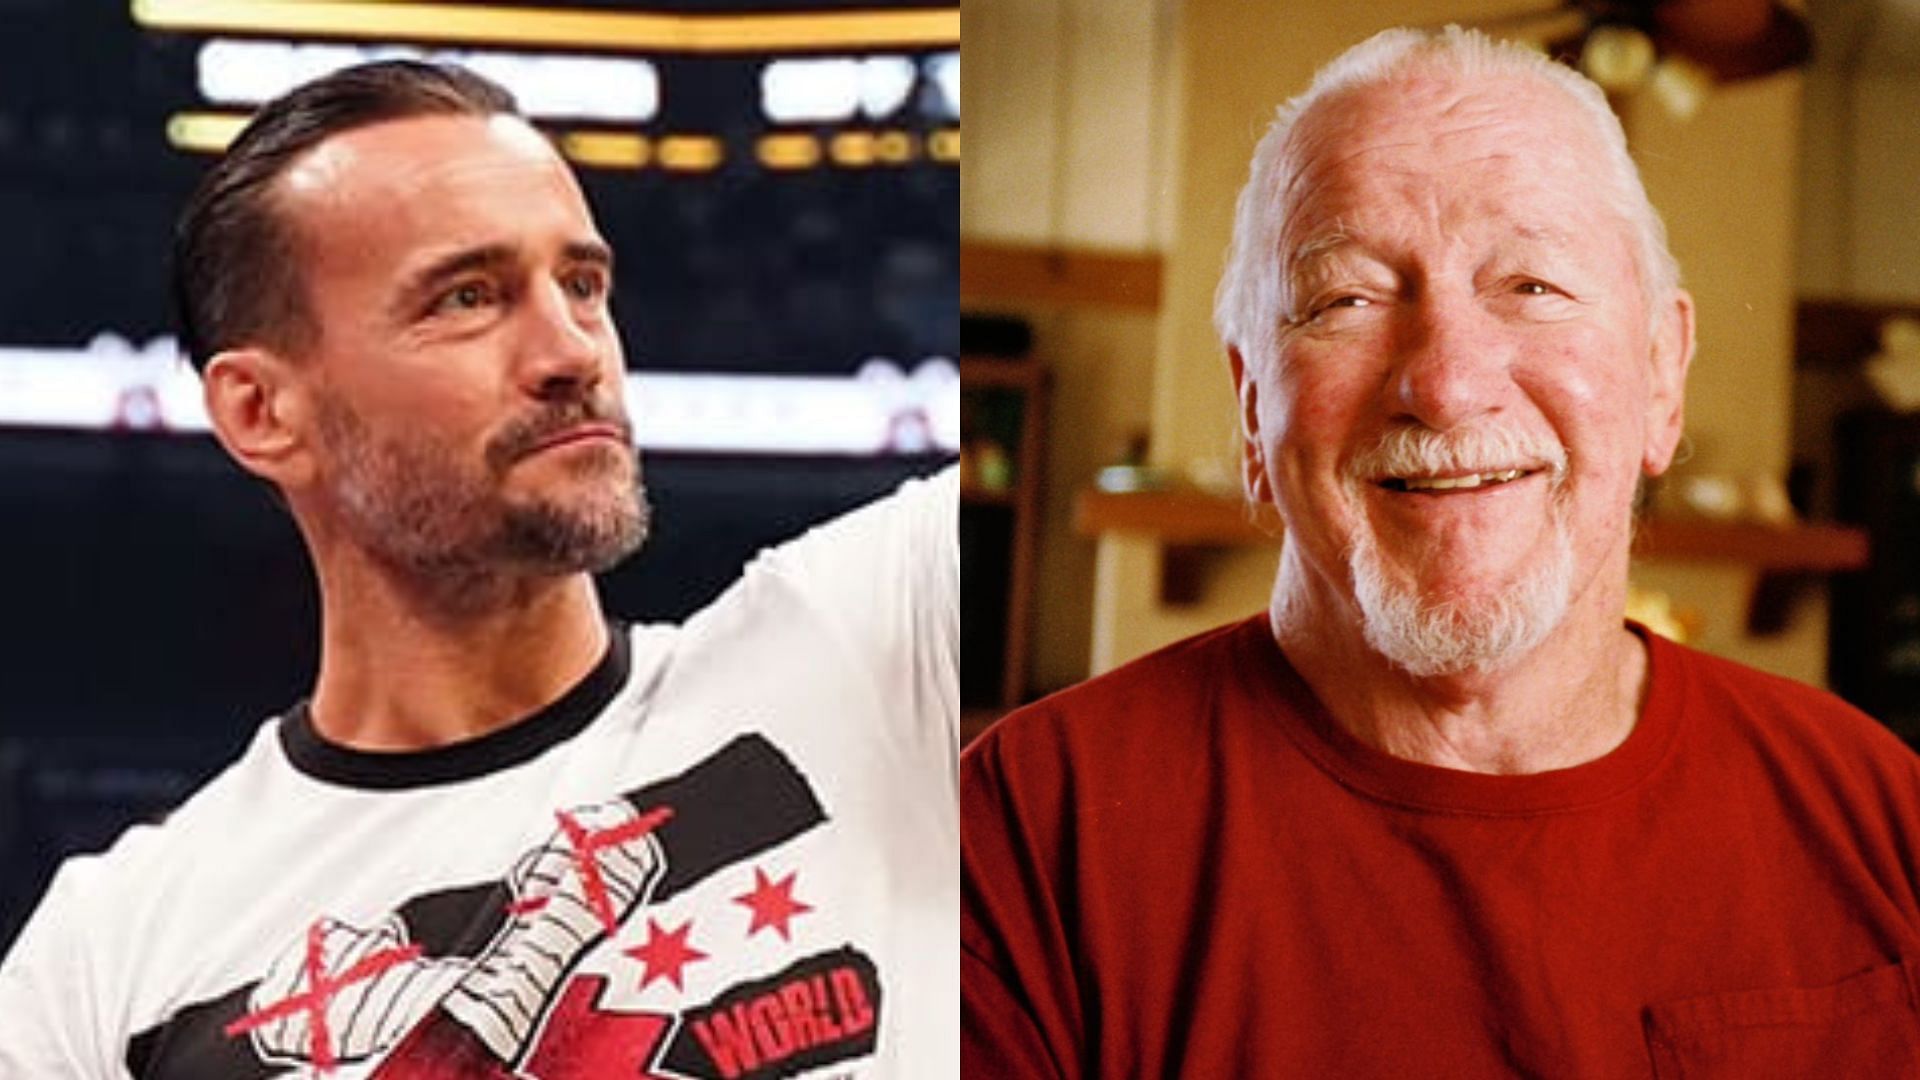 CM Punk has paid tribute to Terry Funk